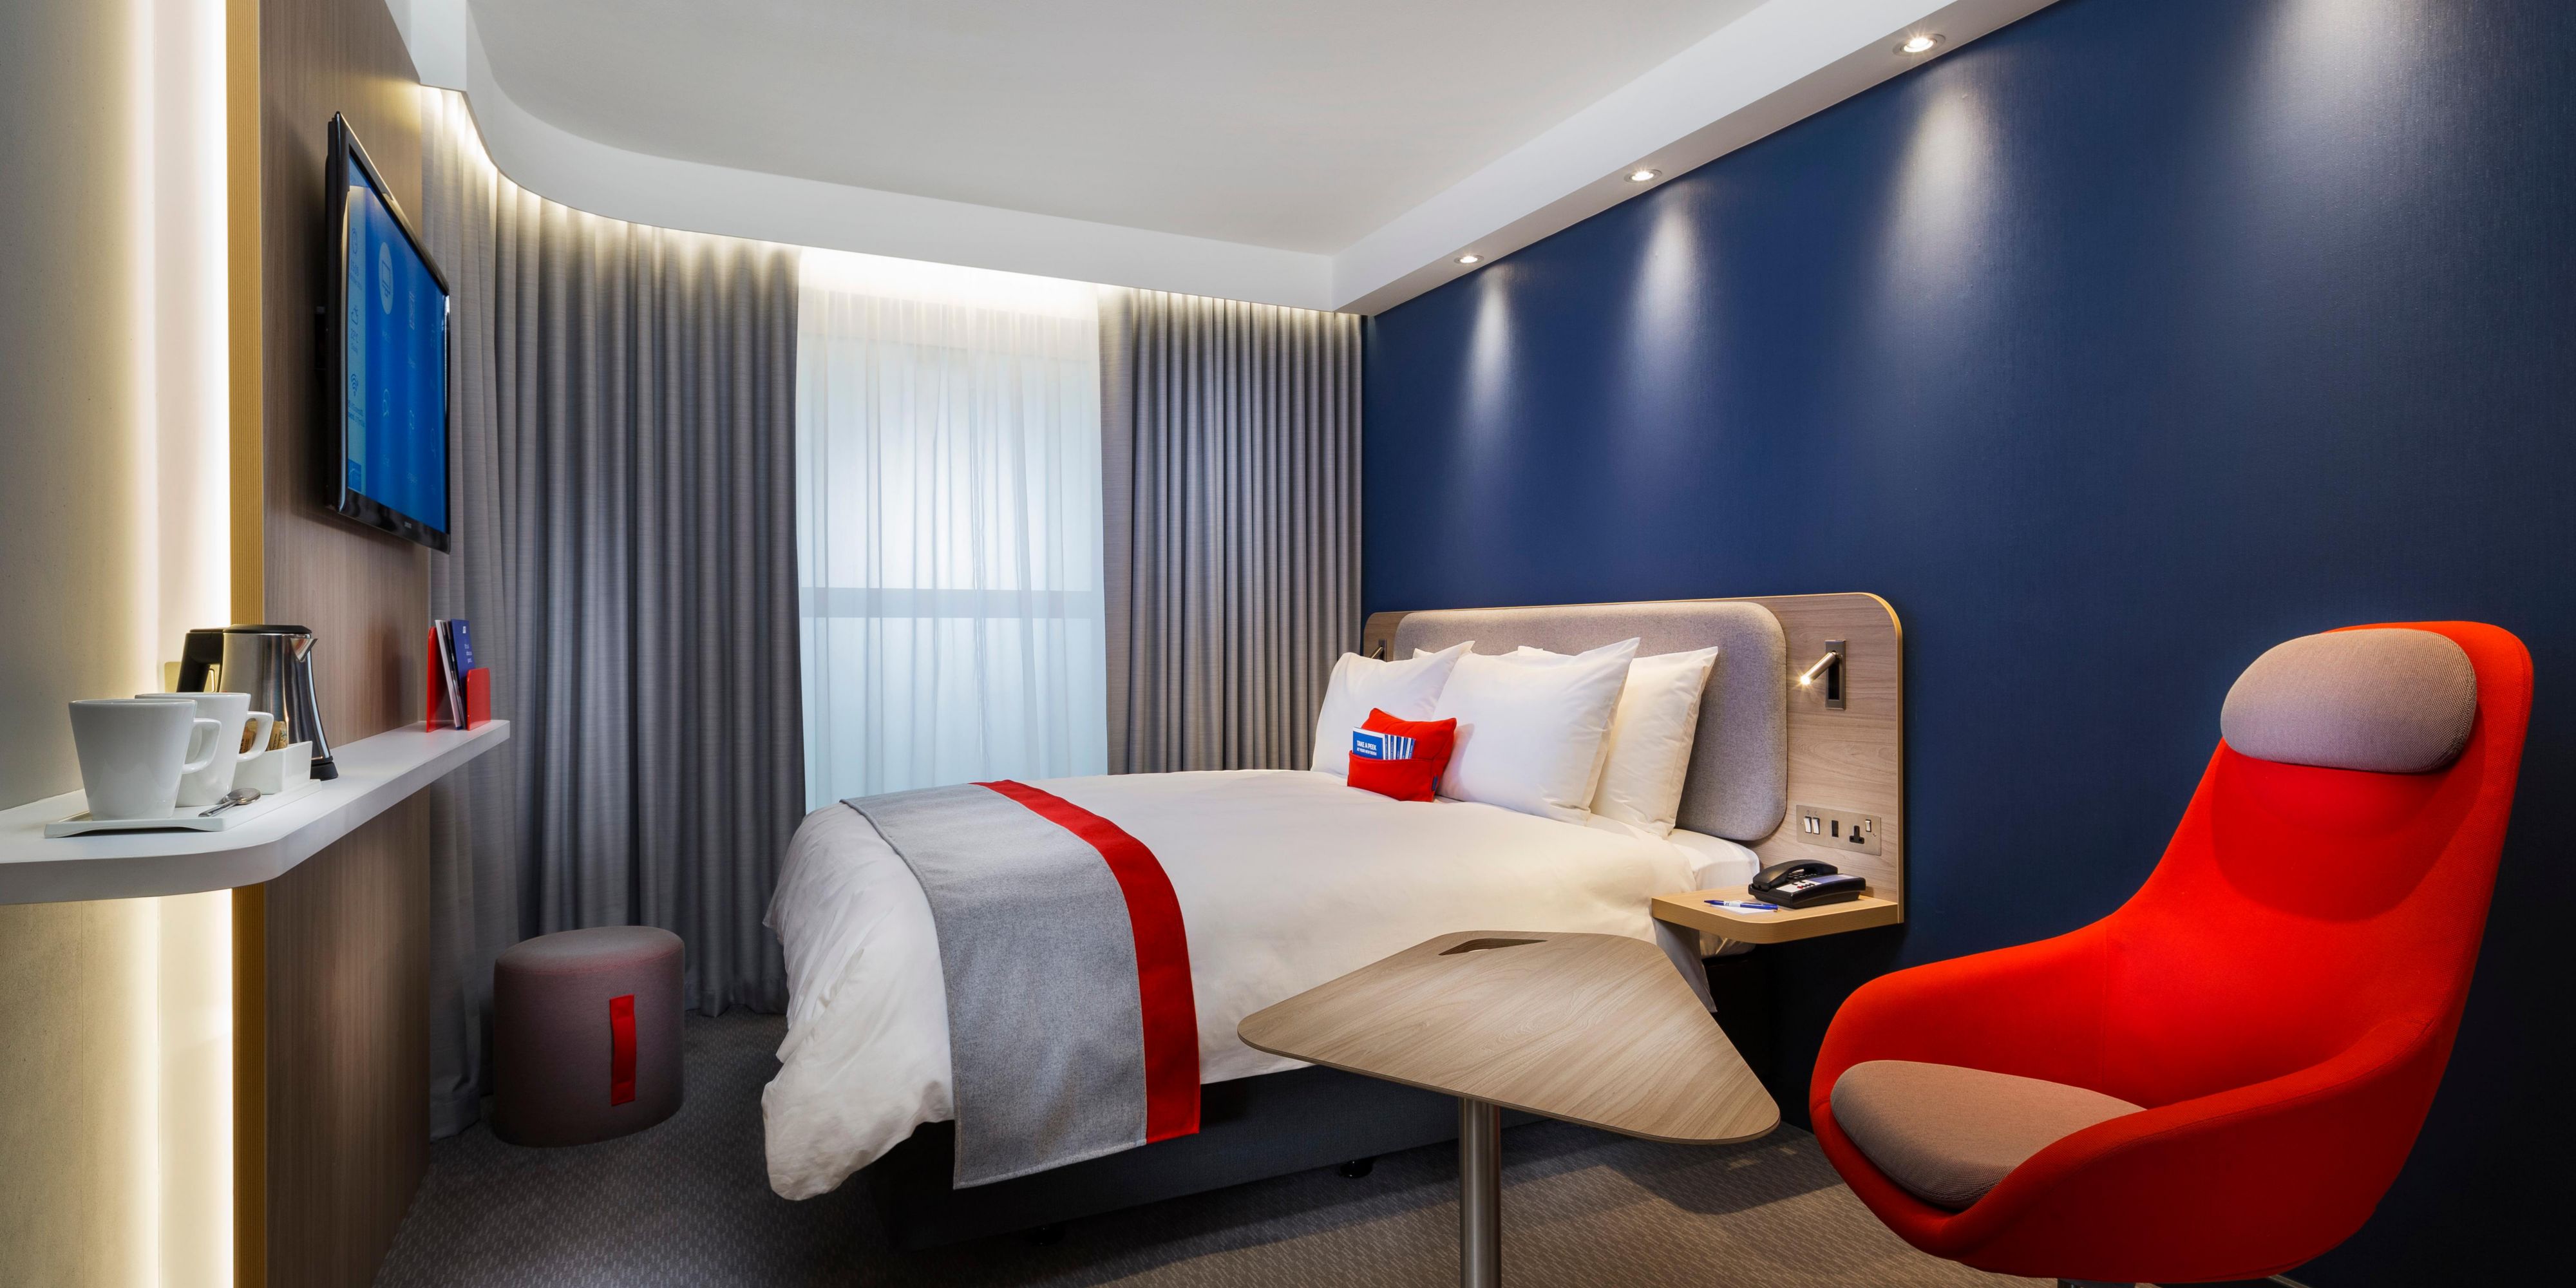 The hotel has recently had an extensive refurbishment of the public areas and bedrooms including installation of air conditioning in all bedrooms.